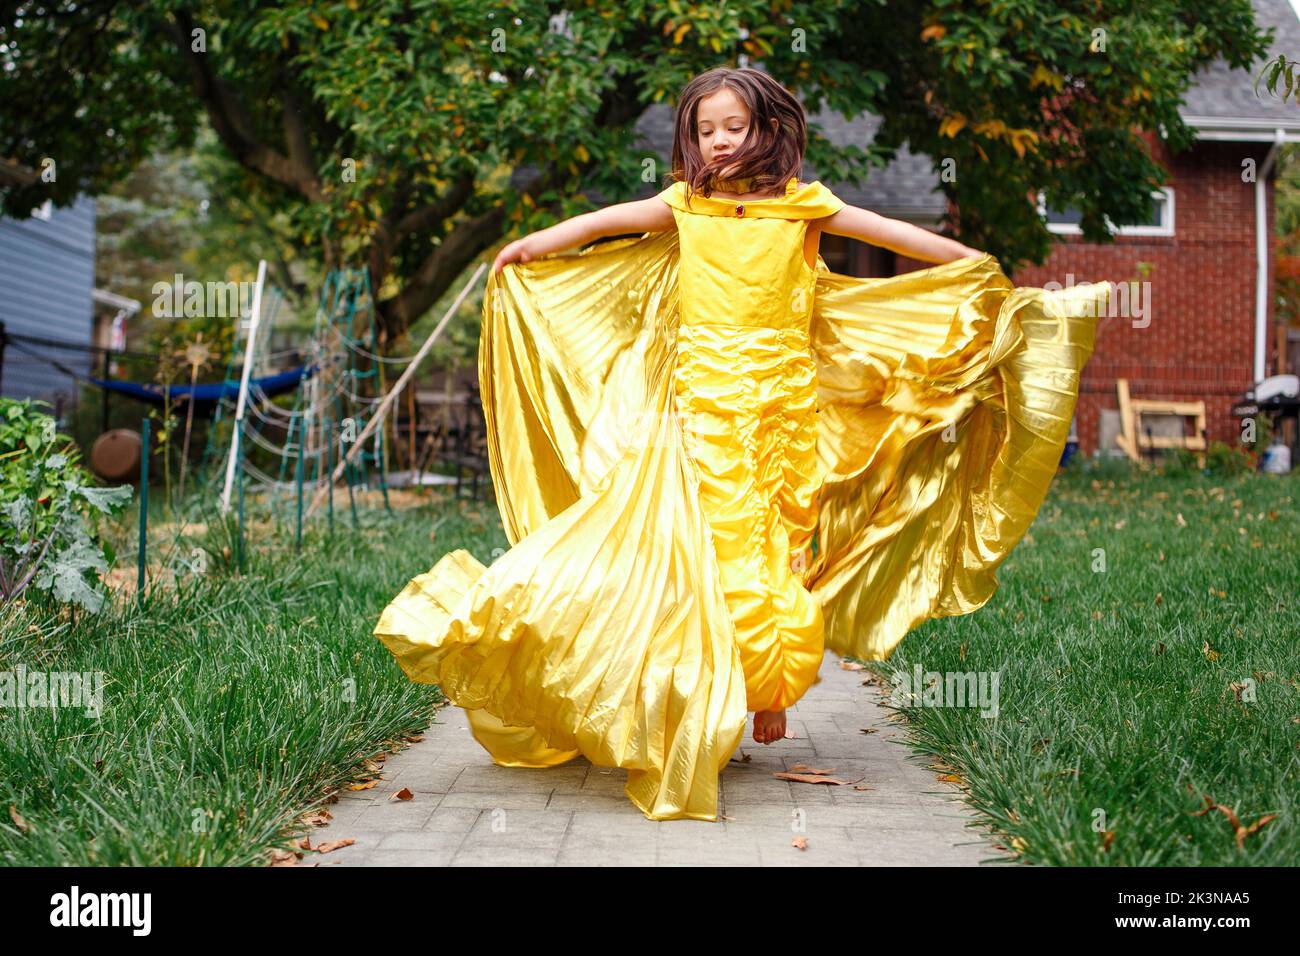 A girl in gold dress and wings leaps barefoot into air in backyard Stock Photo